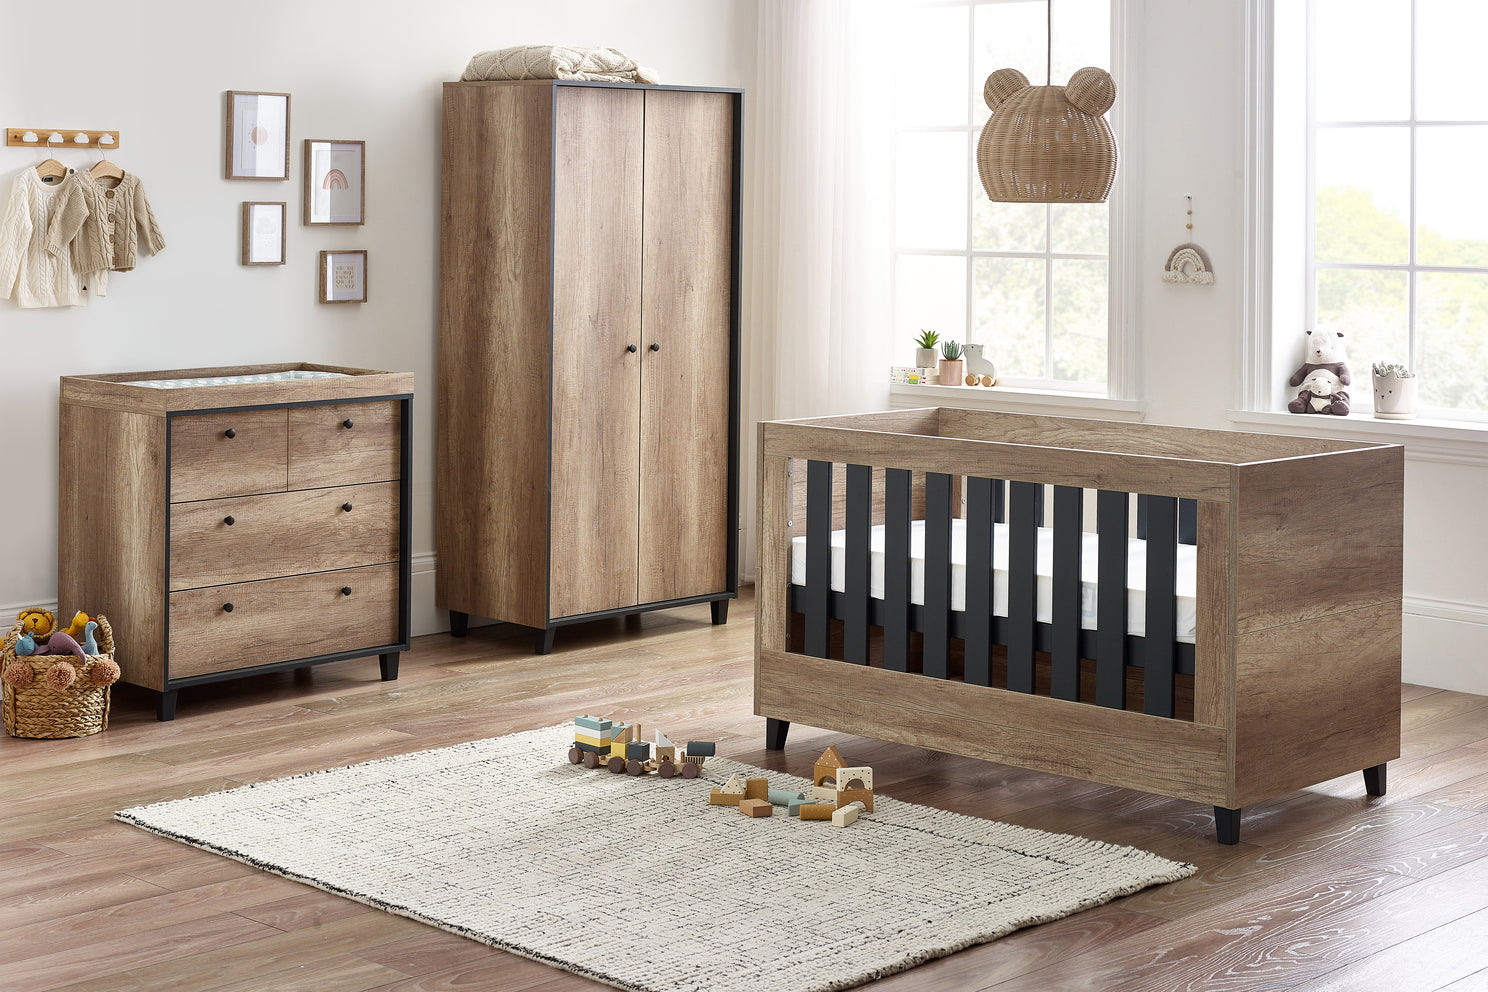 Babystyle Montana Furniture 3 Piece Room Set - For Your Little One